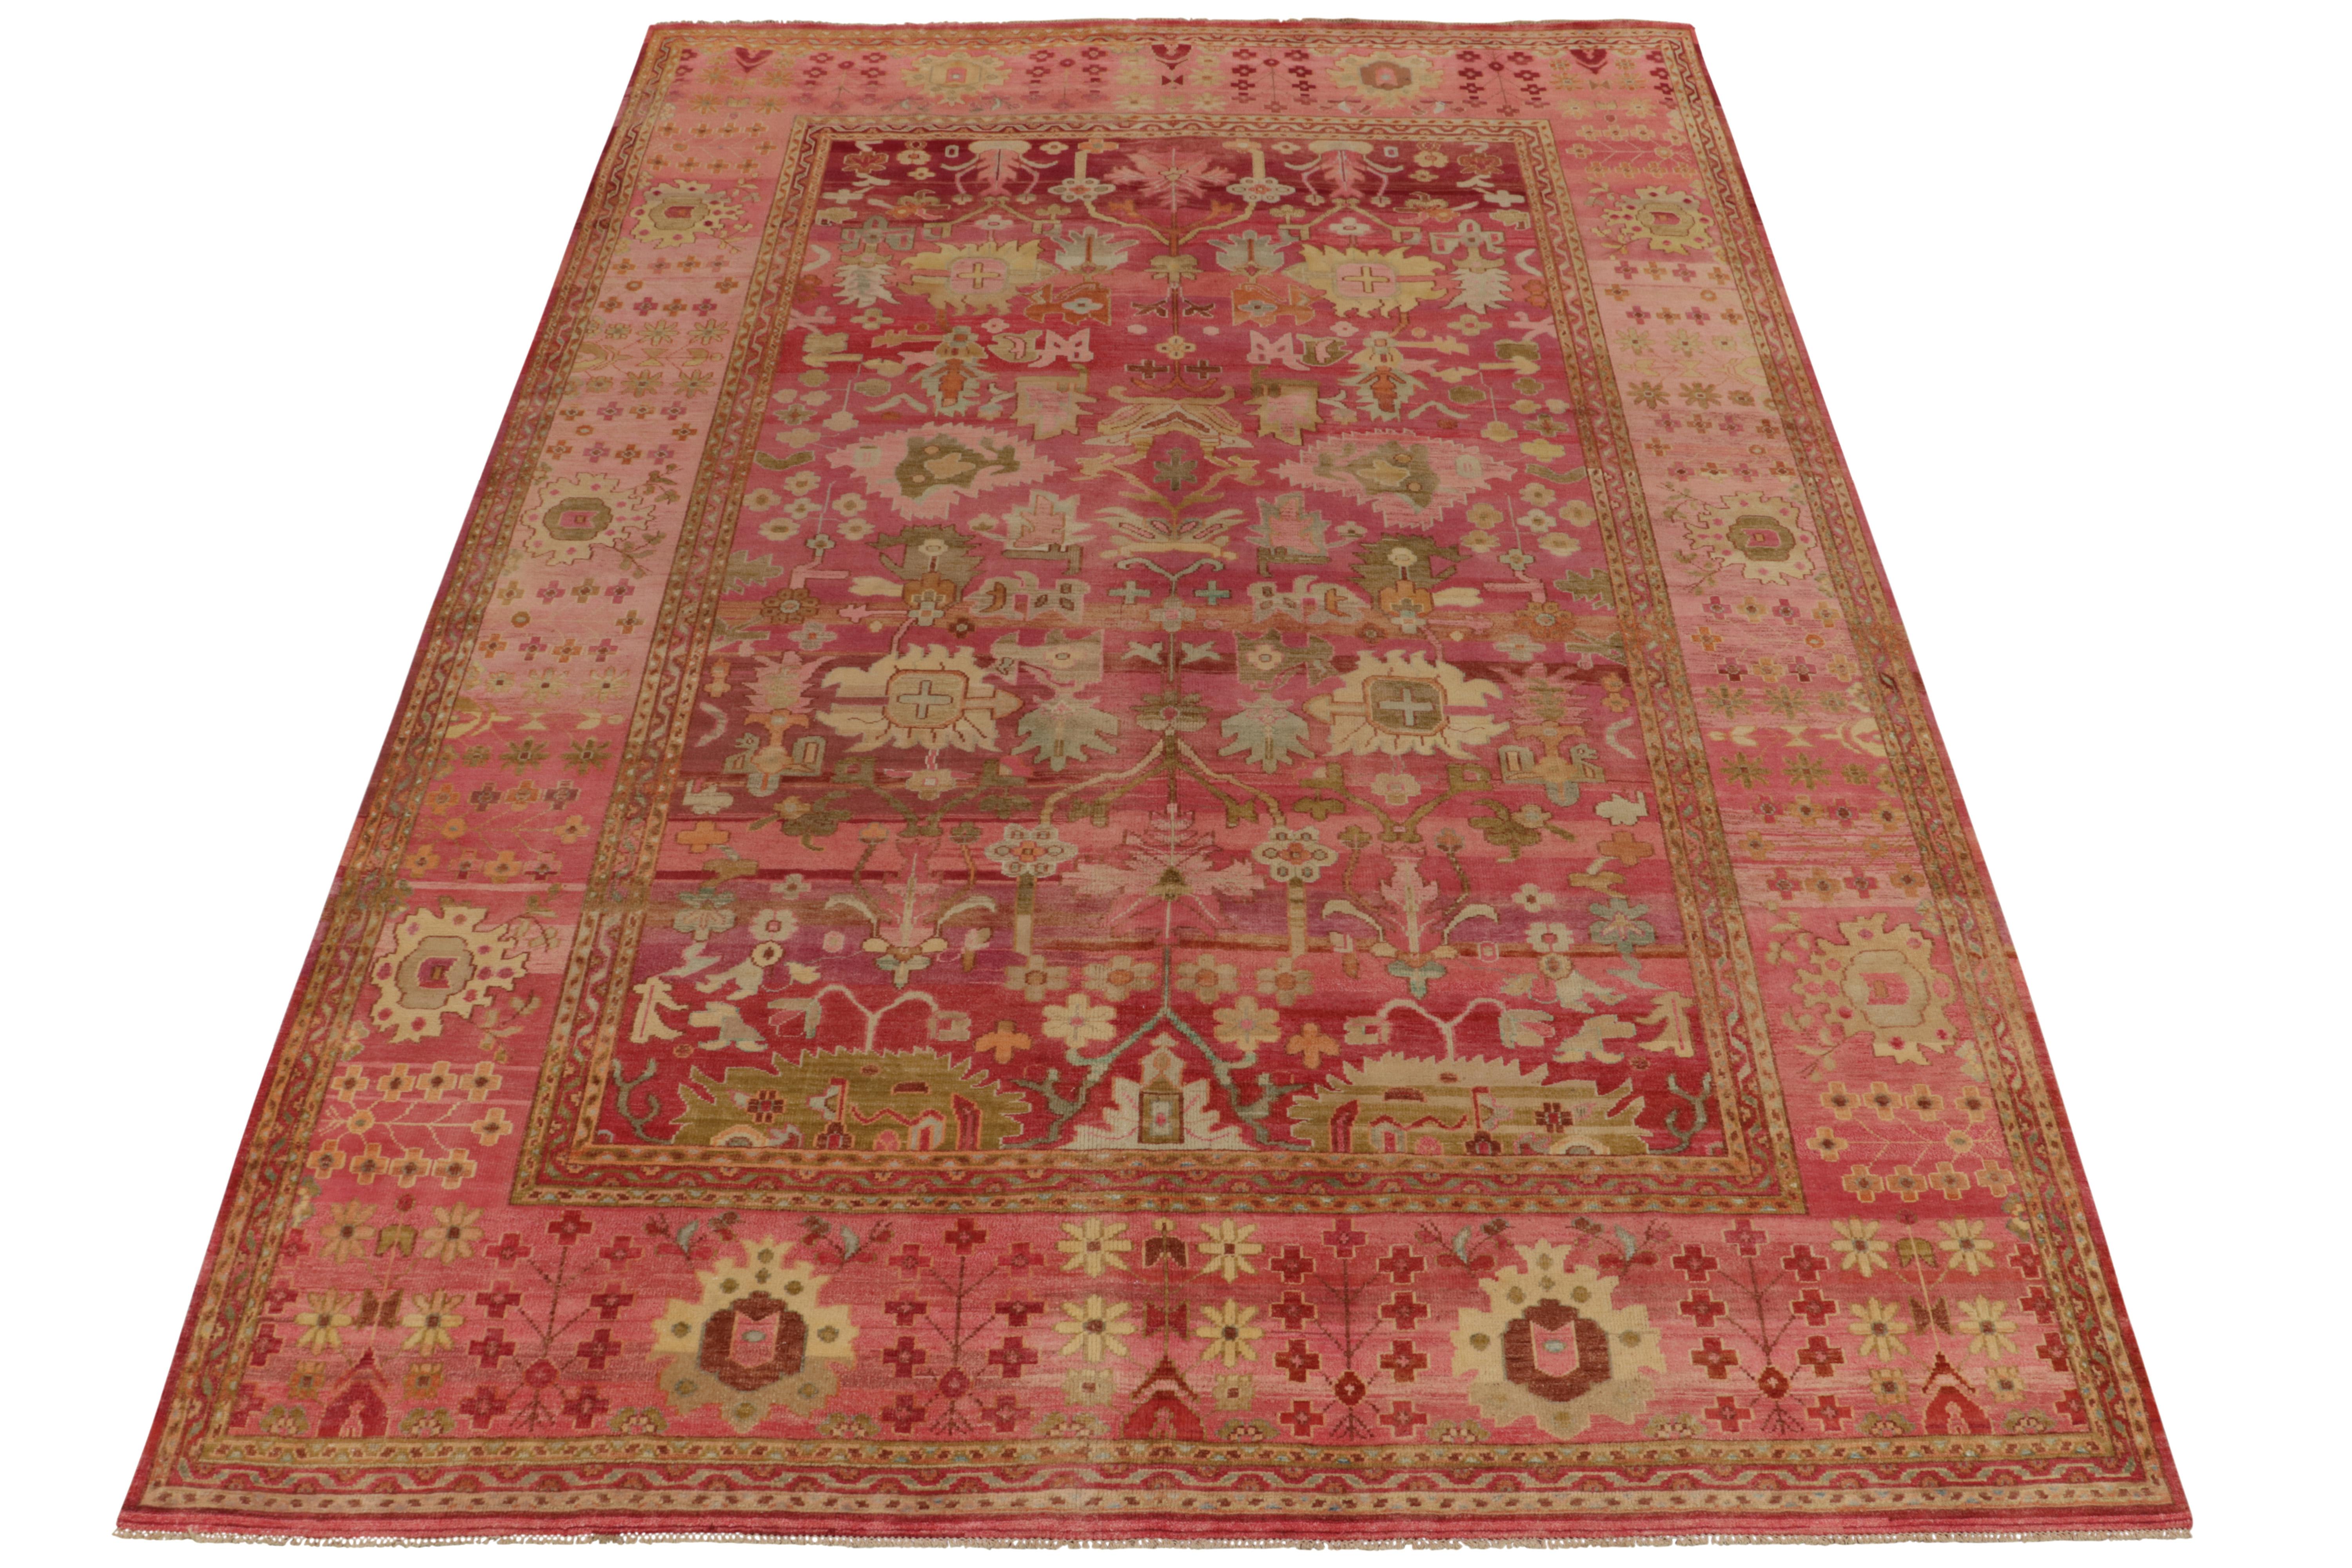 Crafted in luxurious silk, a 10x14 rug inspired by a classic style rug reimagined in a bold modern polychromatic style. Carrying an ambitious vision, the beauty of the scale manifests with a floral pattern laying in reds, pinks and beige-brown and